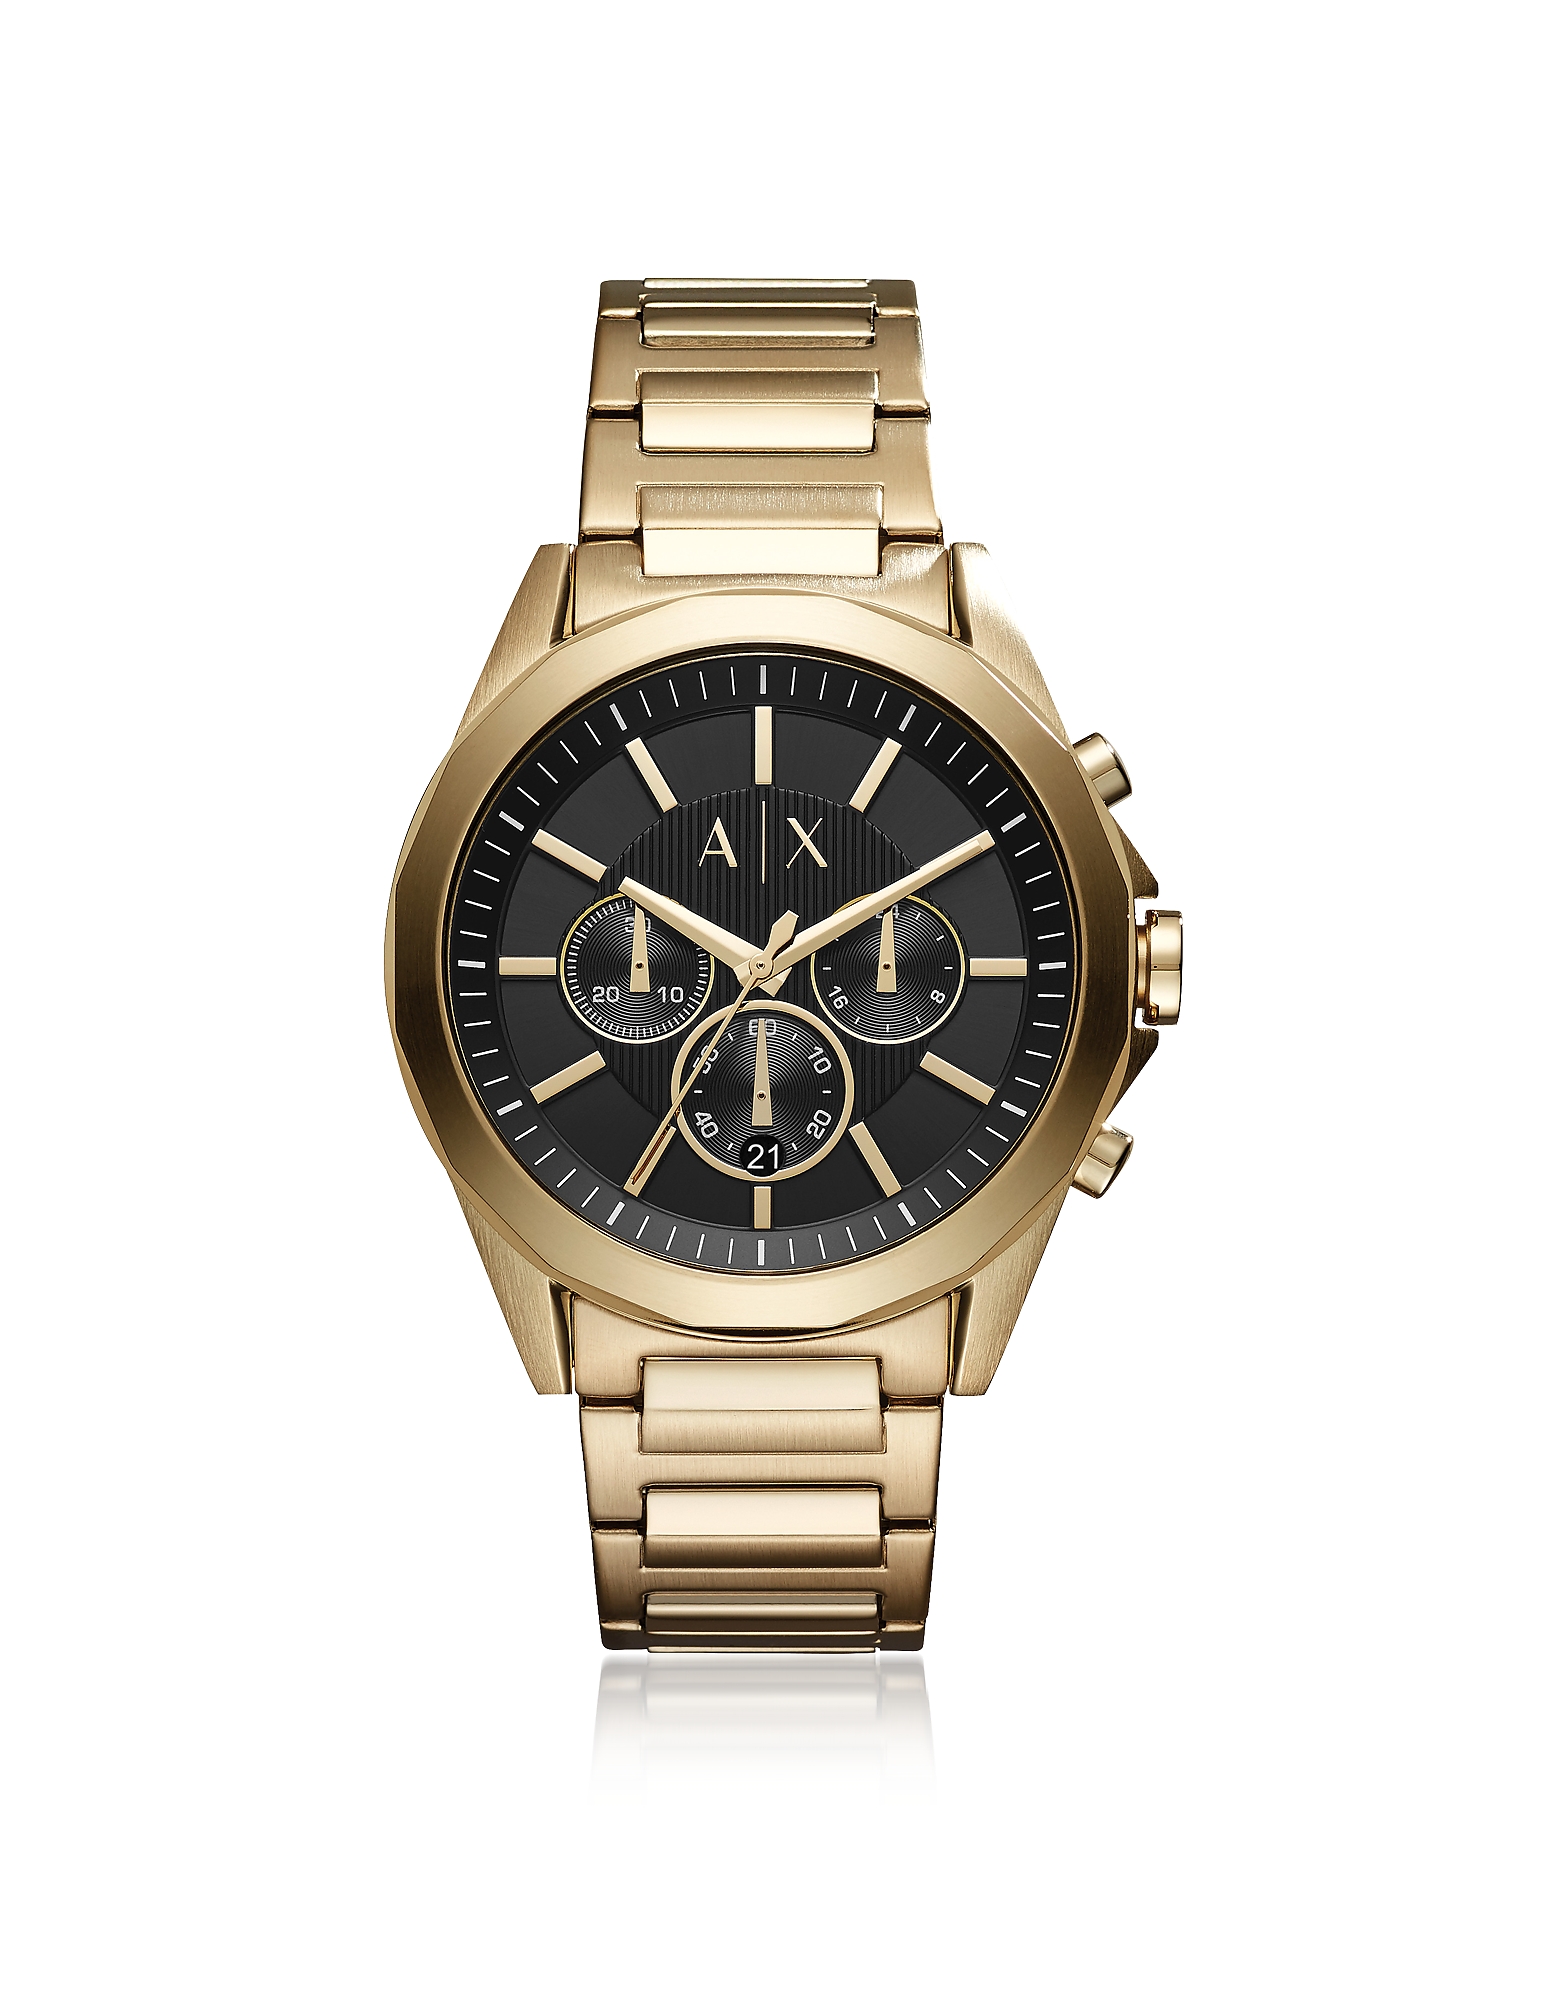 

Drexler Black Dial and Gold Tone Stainless Steel Men's Chronograph Watch